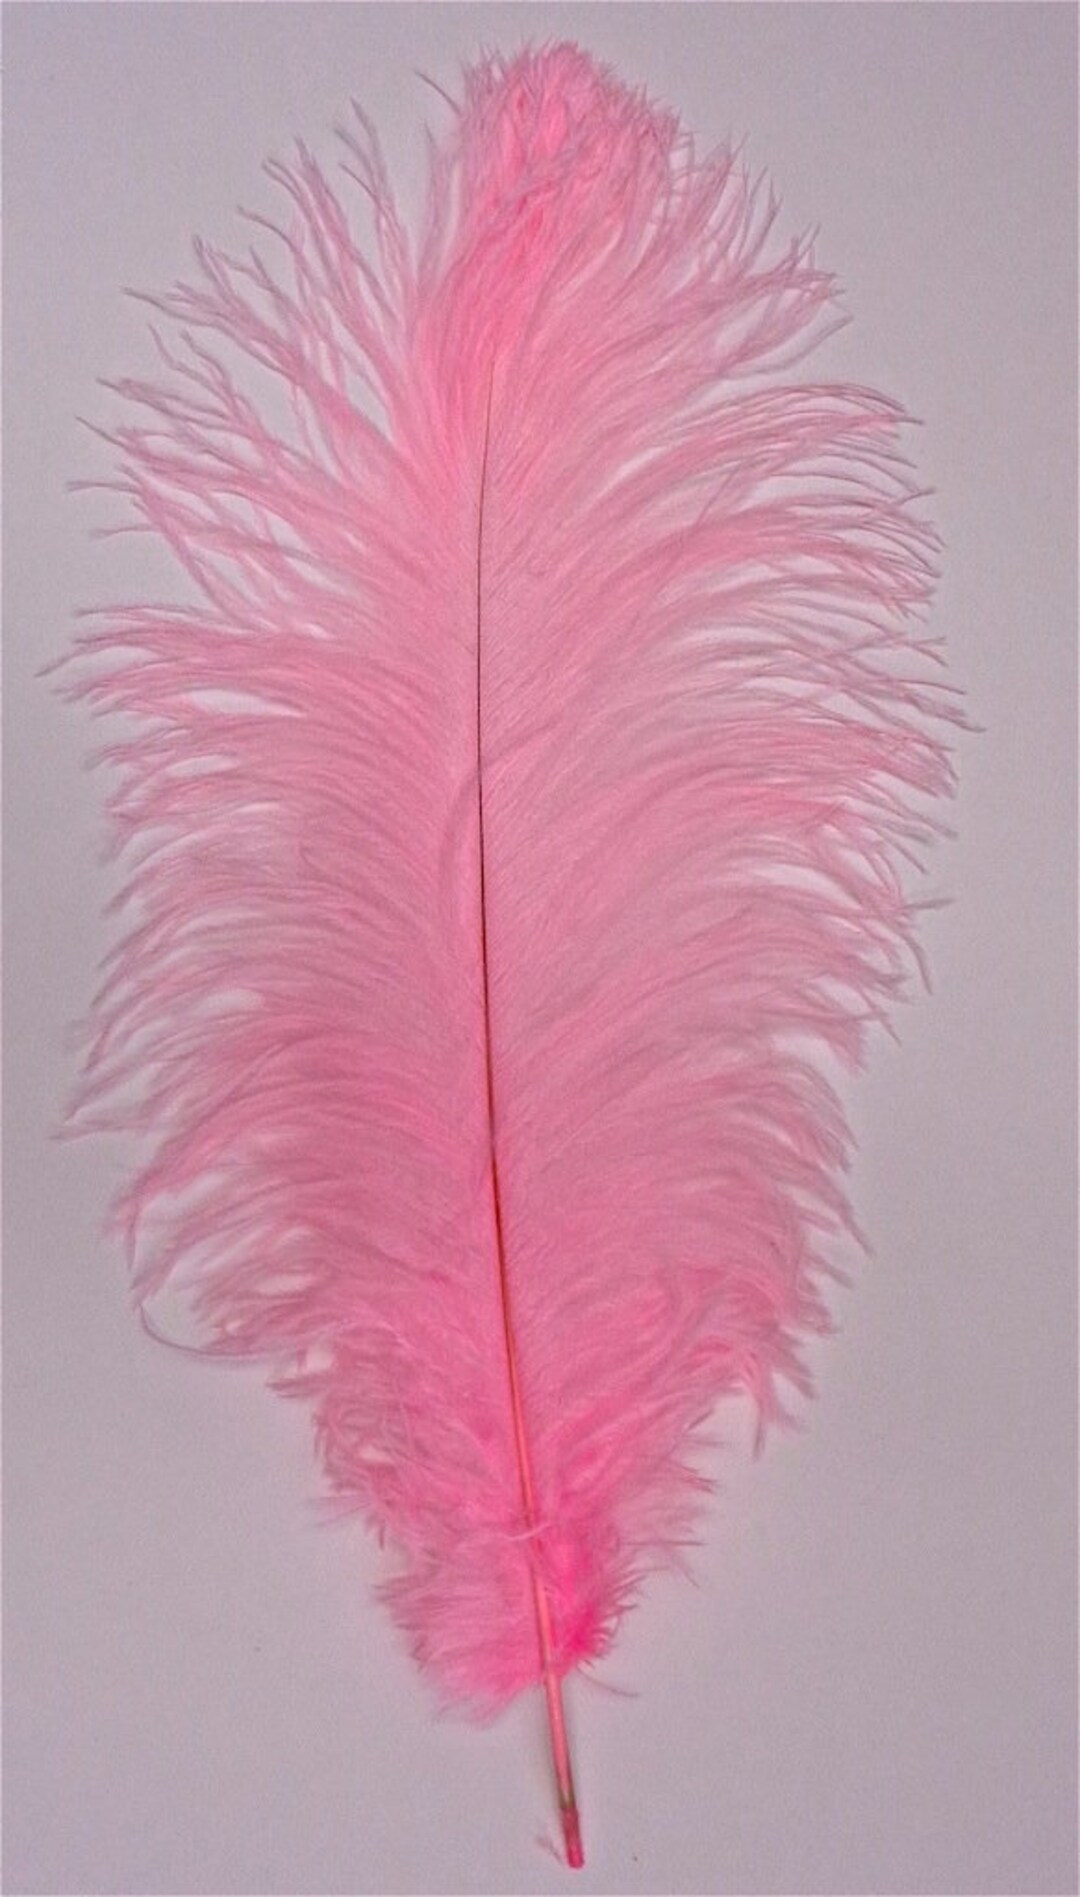 Candy Pink Ostrich Feather 16-20 Inches per Each - Etsy